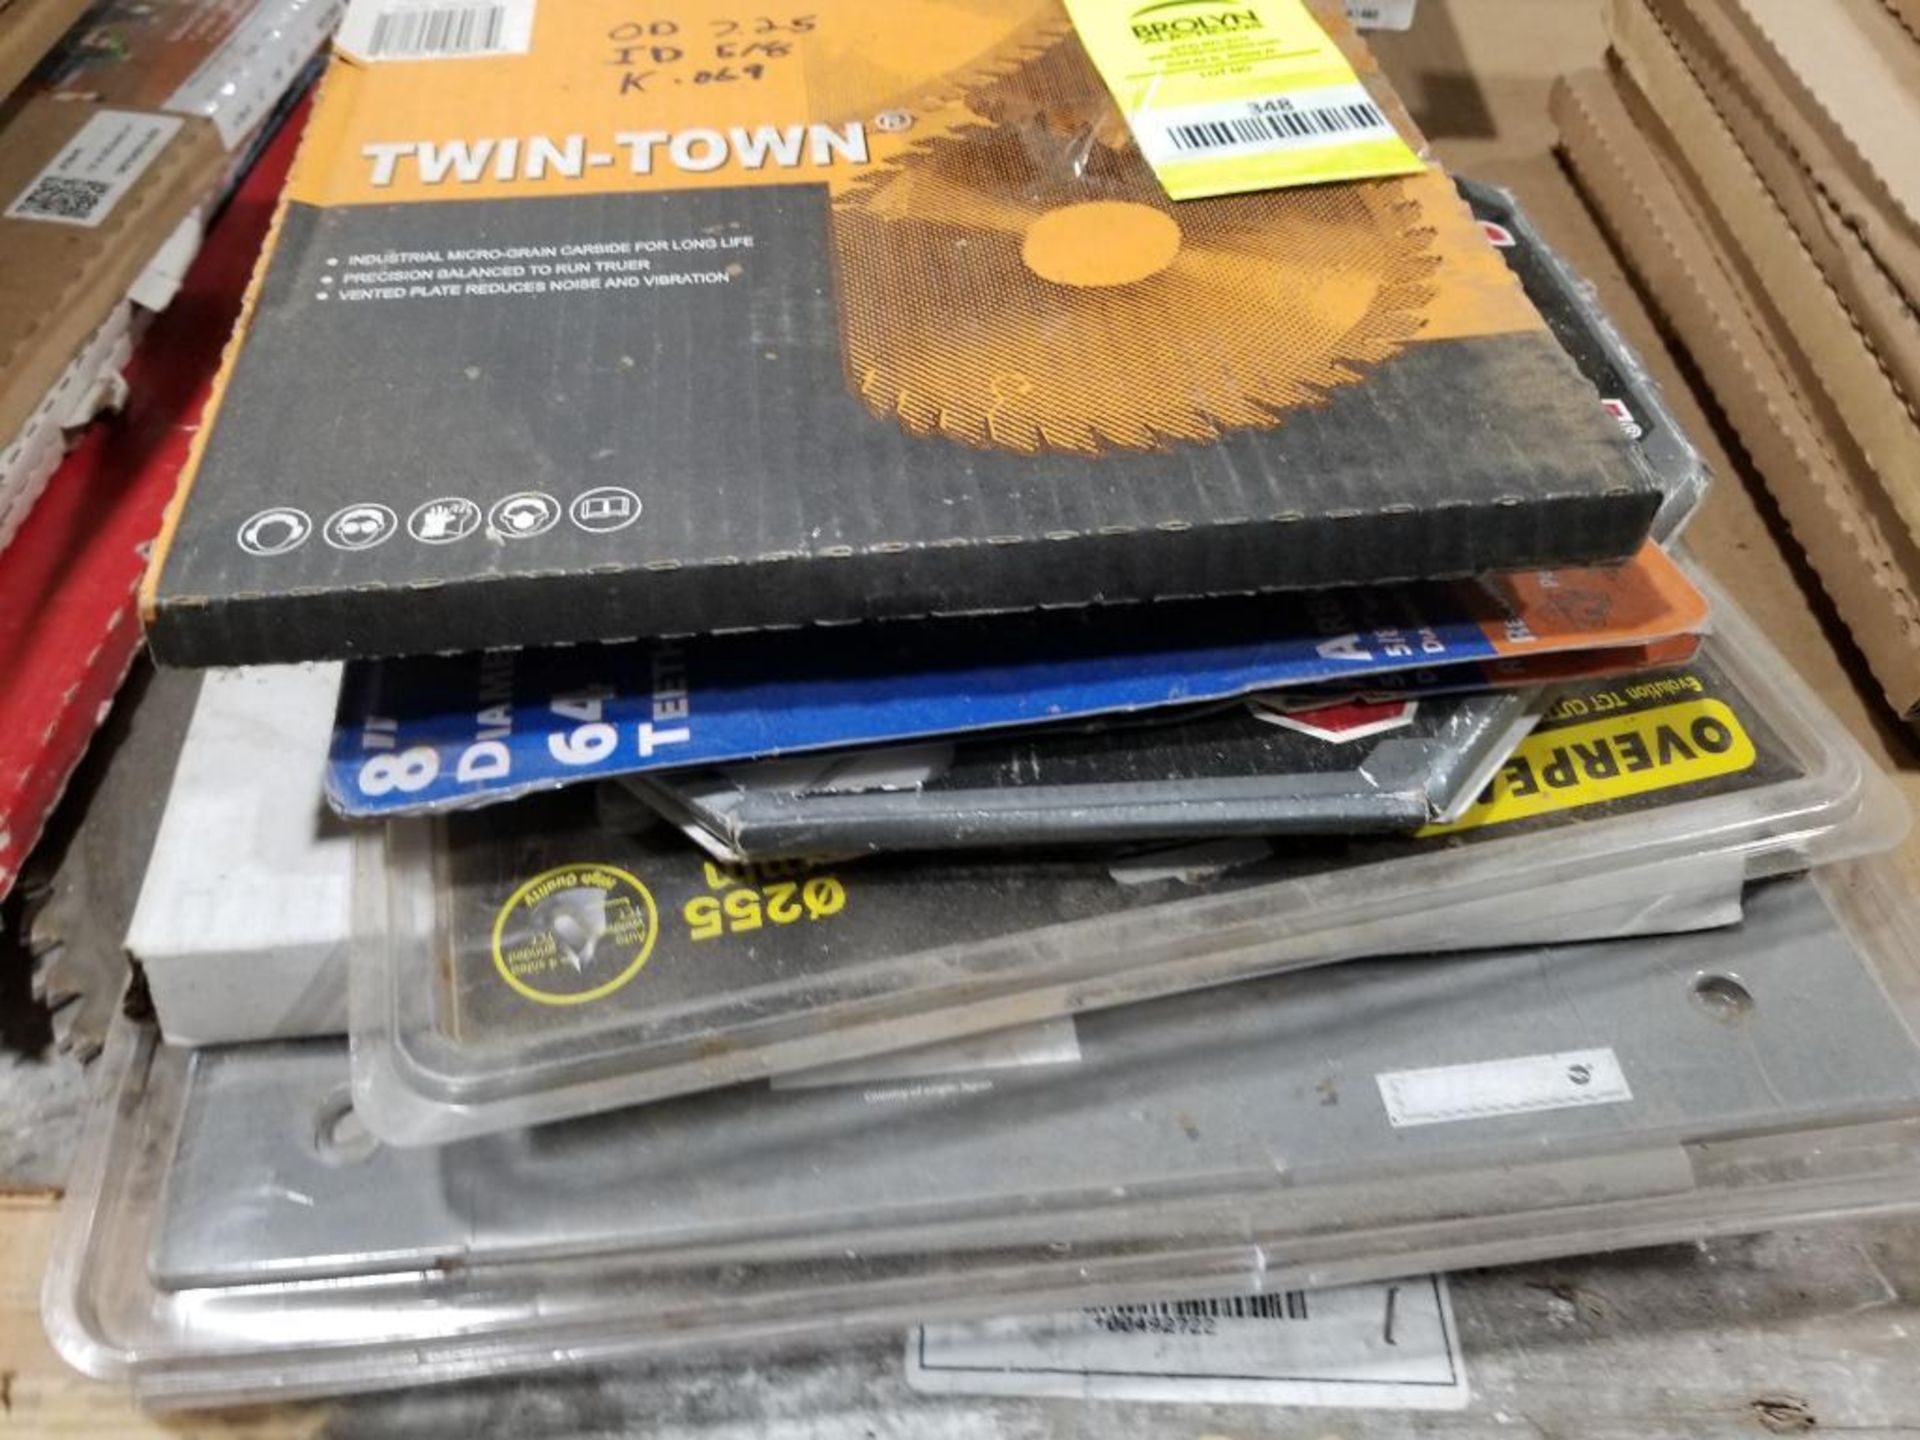 Large assortment of saw blades.